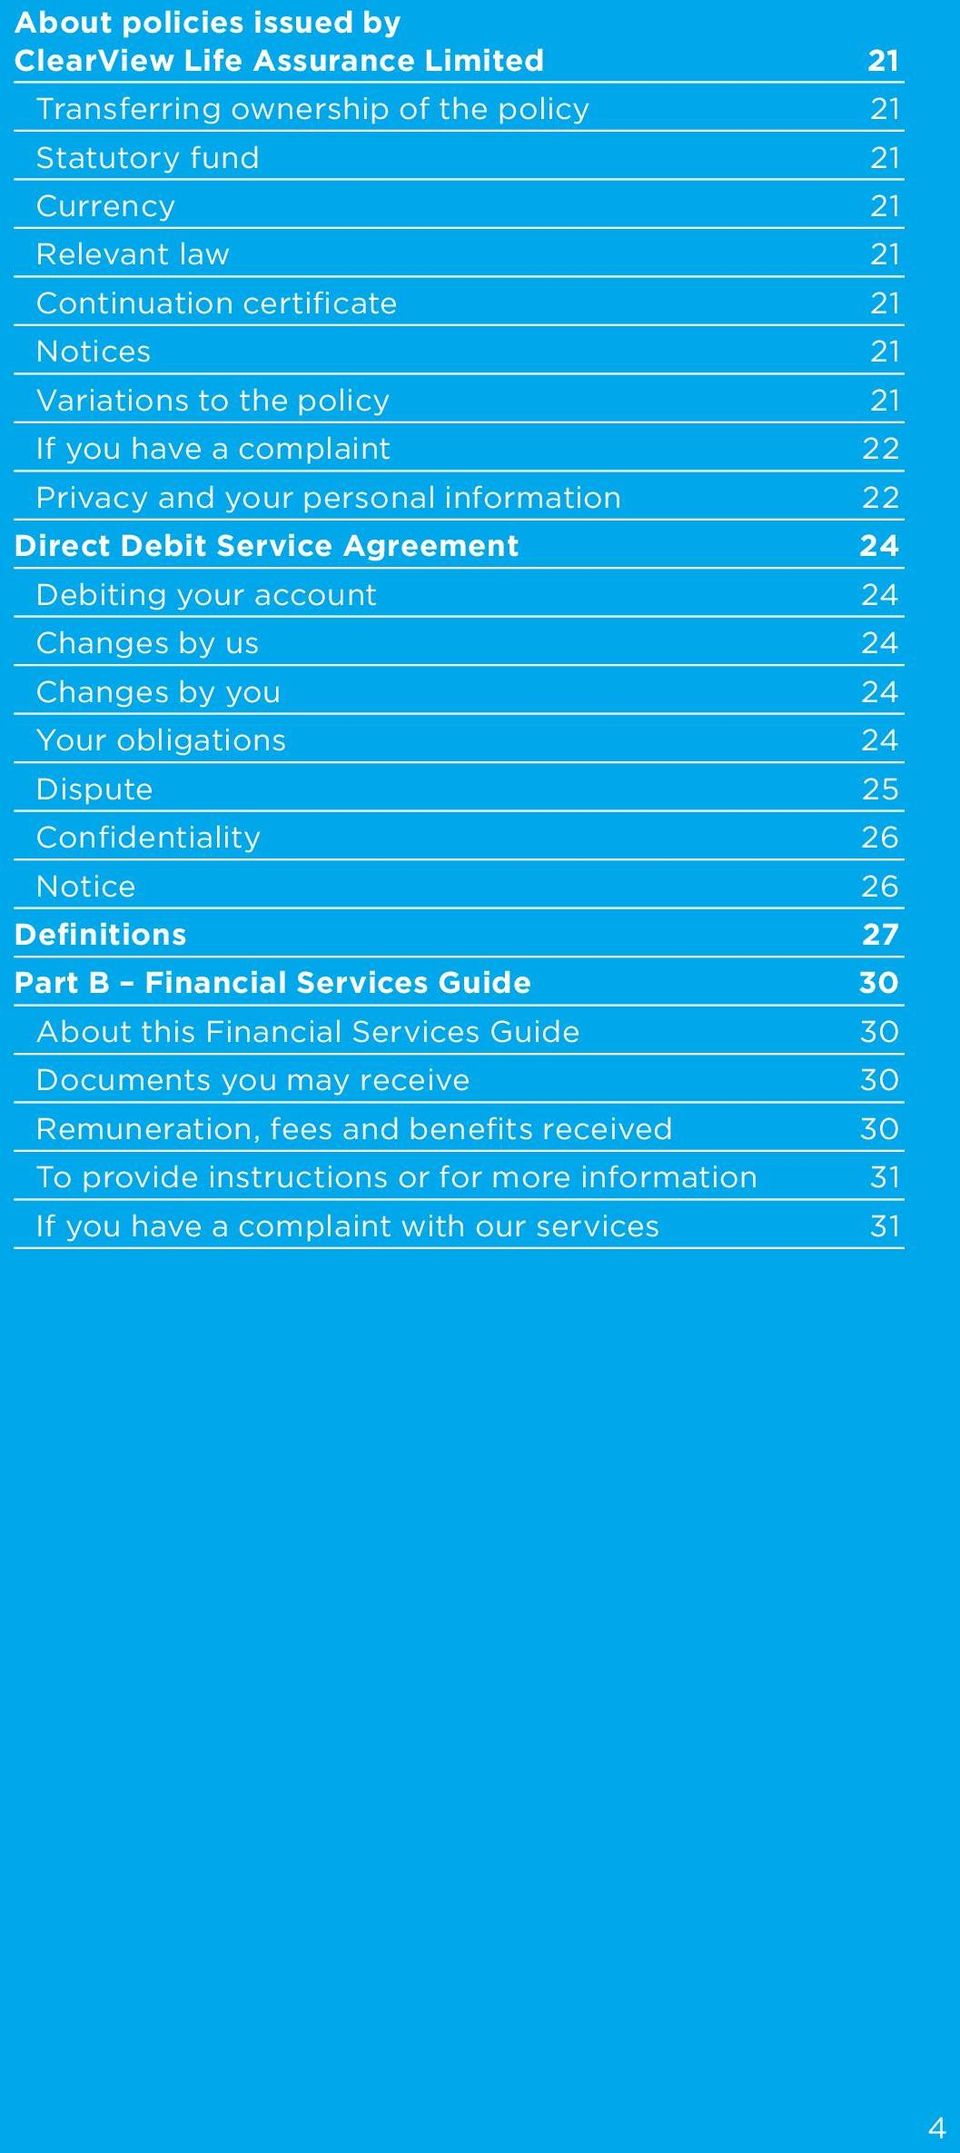 Changes by us 24 Changes by you 24 Your obligations 24 Dispute 25 Confidentiality 26 Notice 26 Definitions 27 Part B Financial Services Guide 30 About this Financial